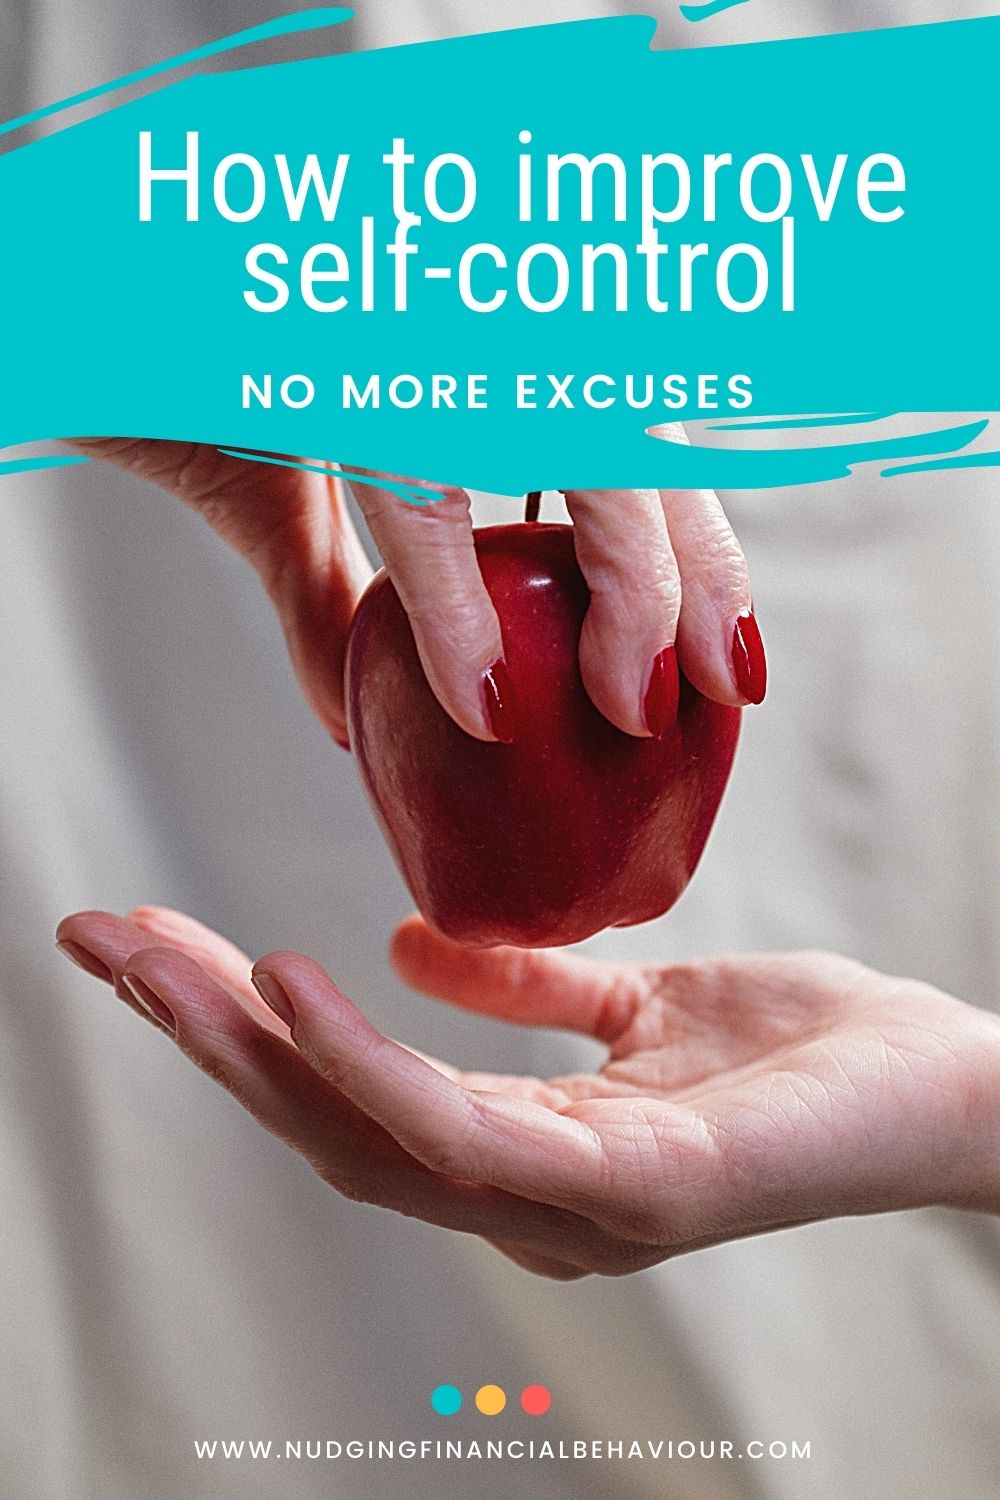 How to improve self-control